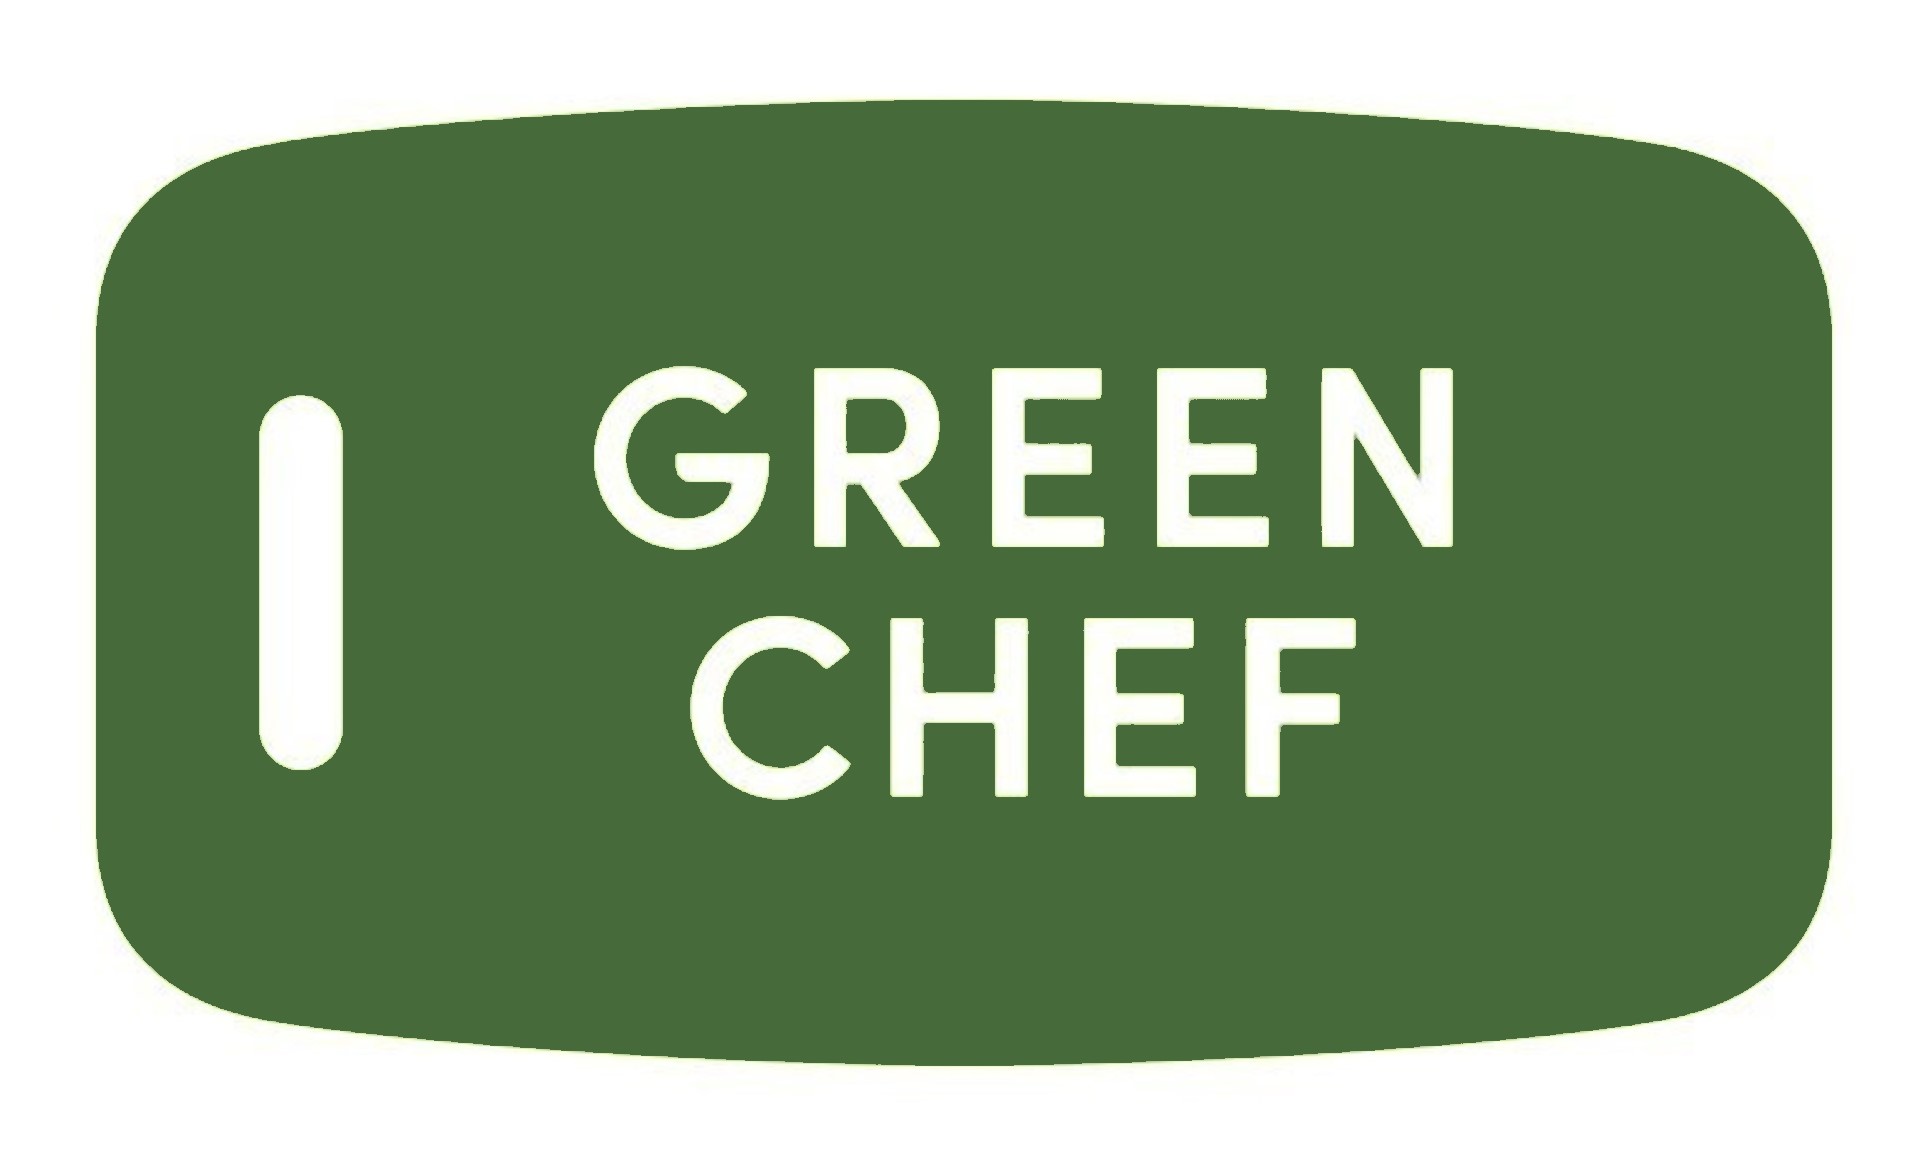 Green Chef Coupons & Promo Codes